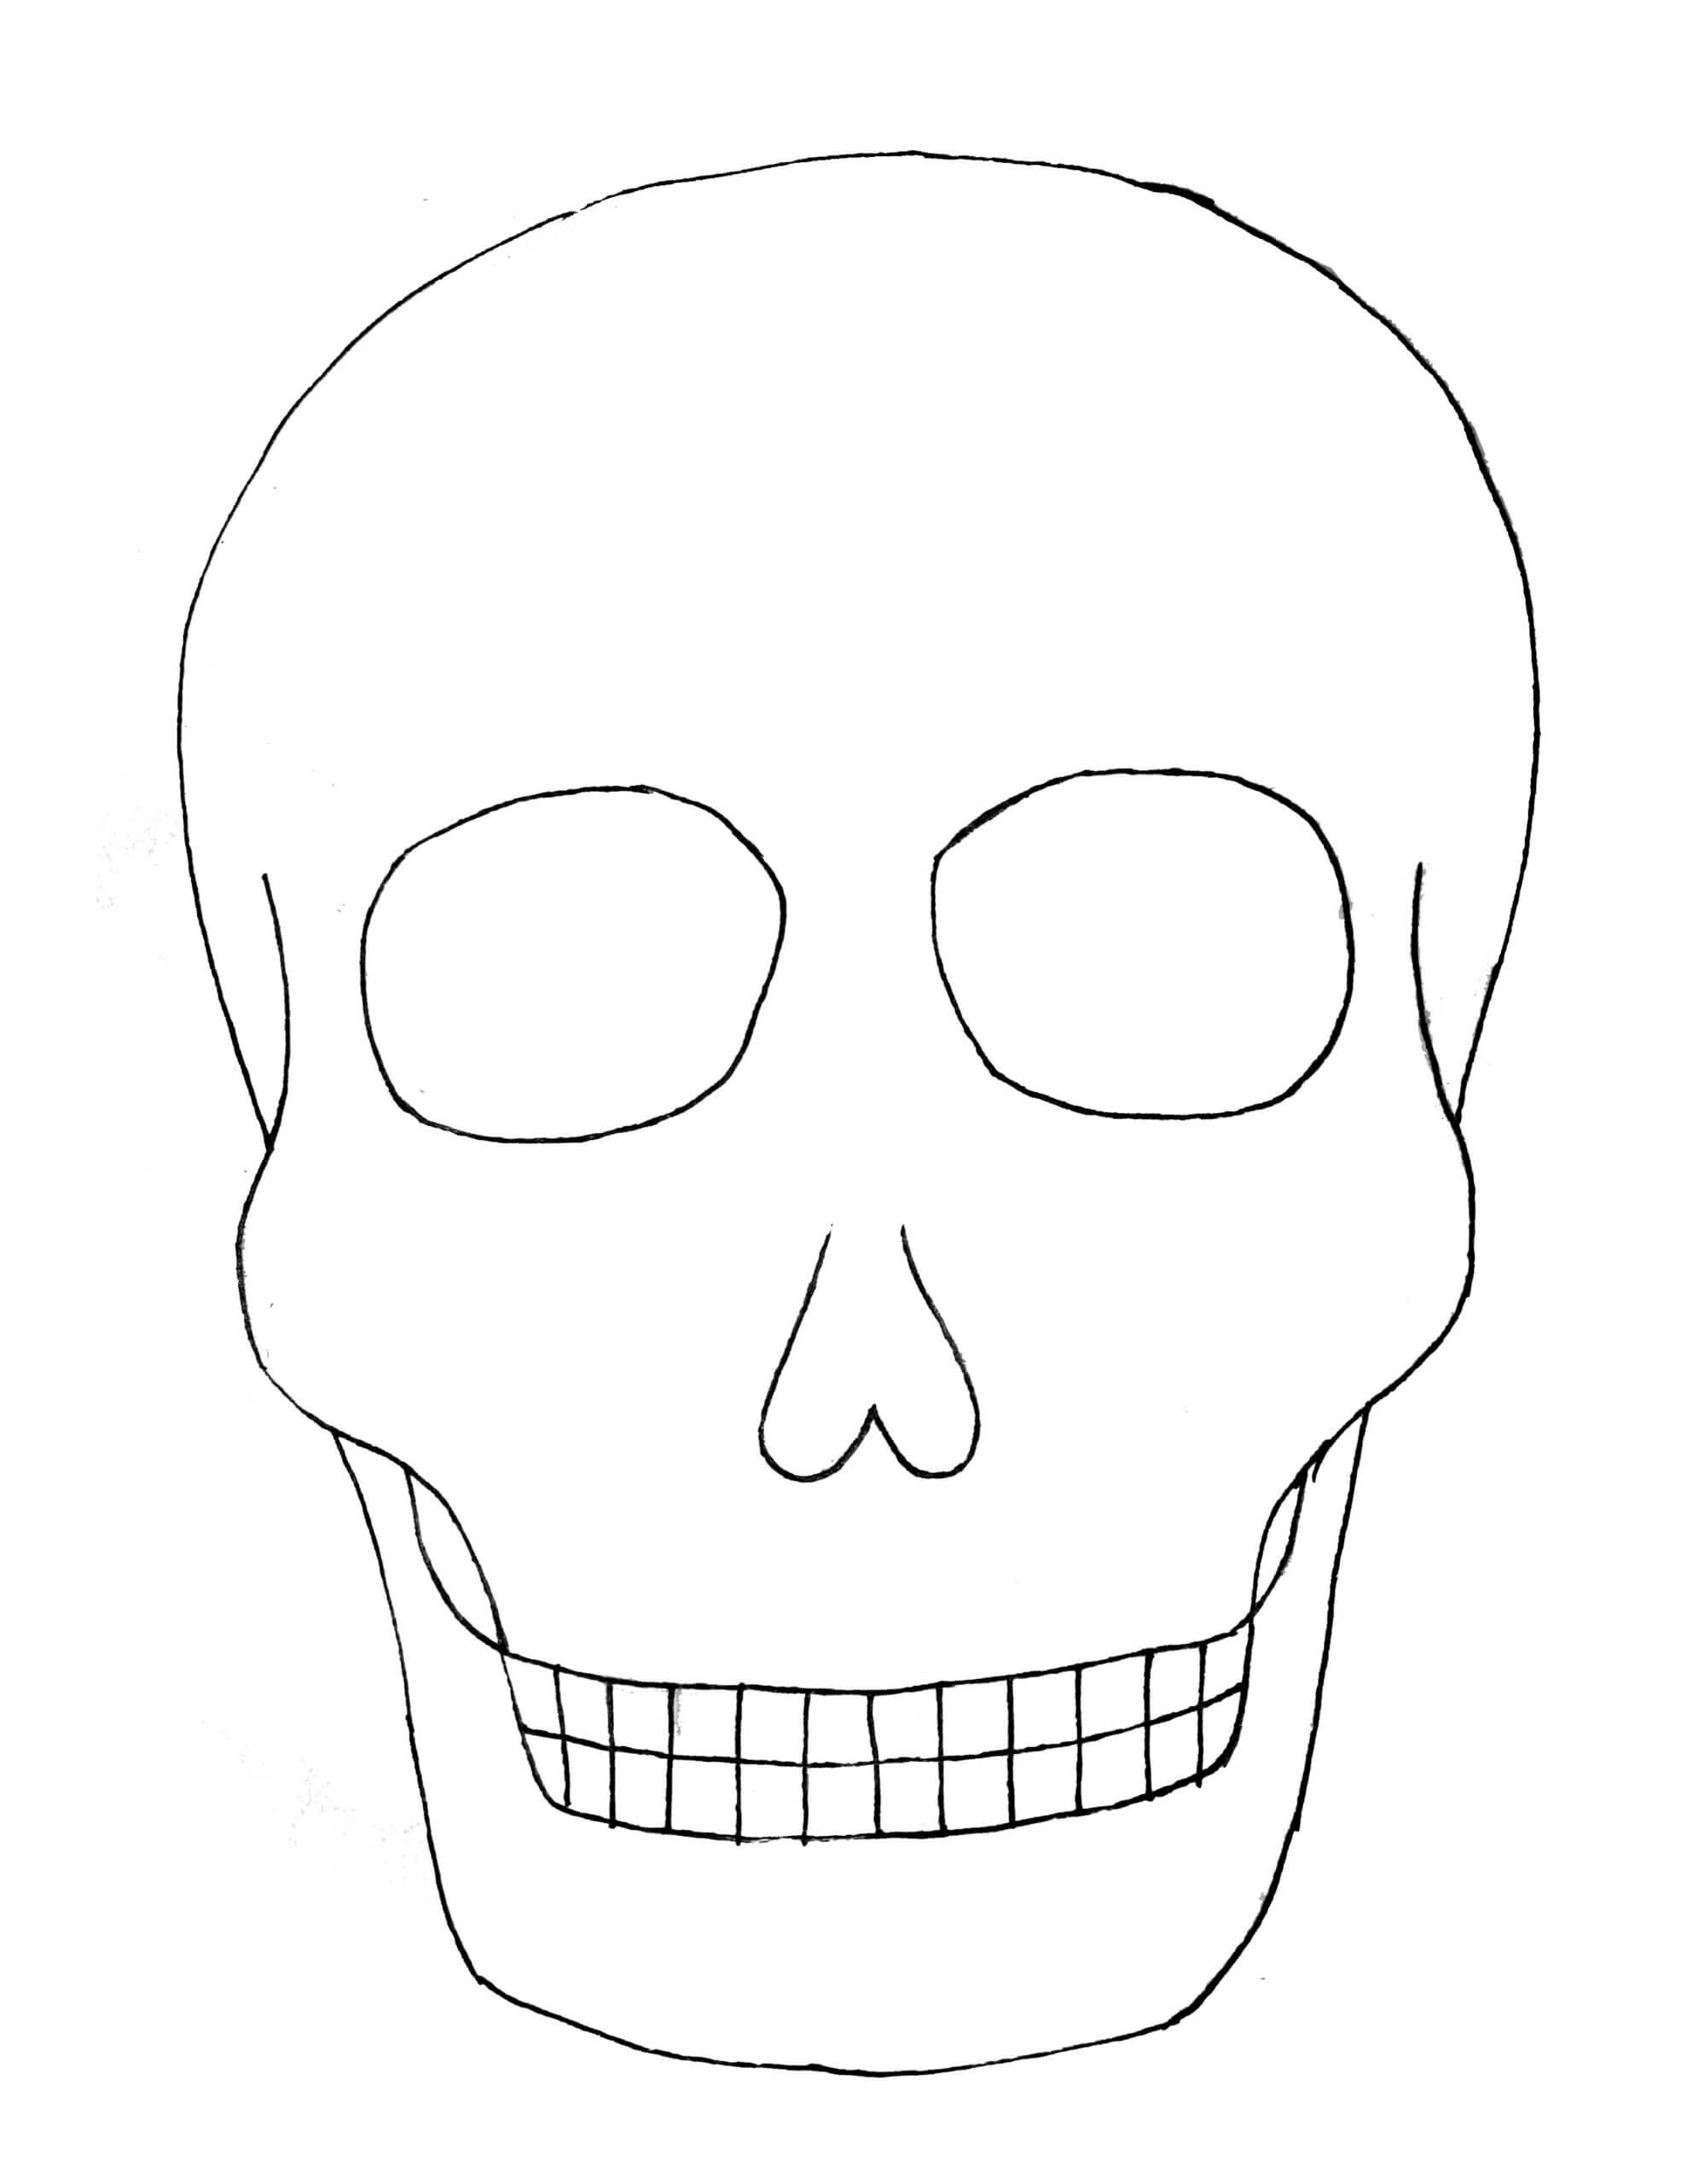 Best Coloring : Day Of The Sugar Skull Blank Template Skulls For Blank Sugar Skull Template